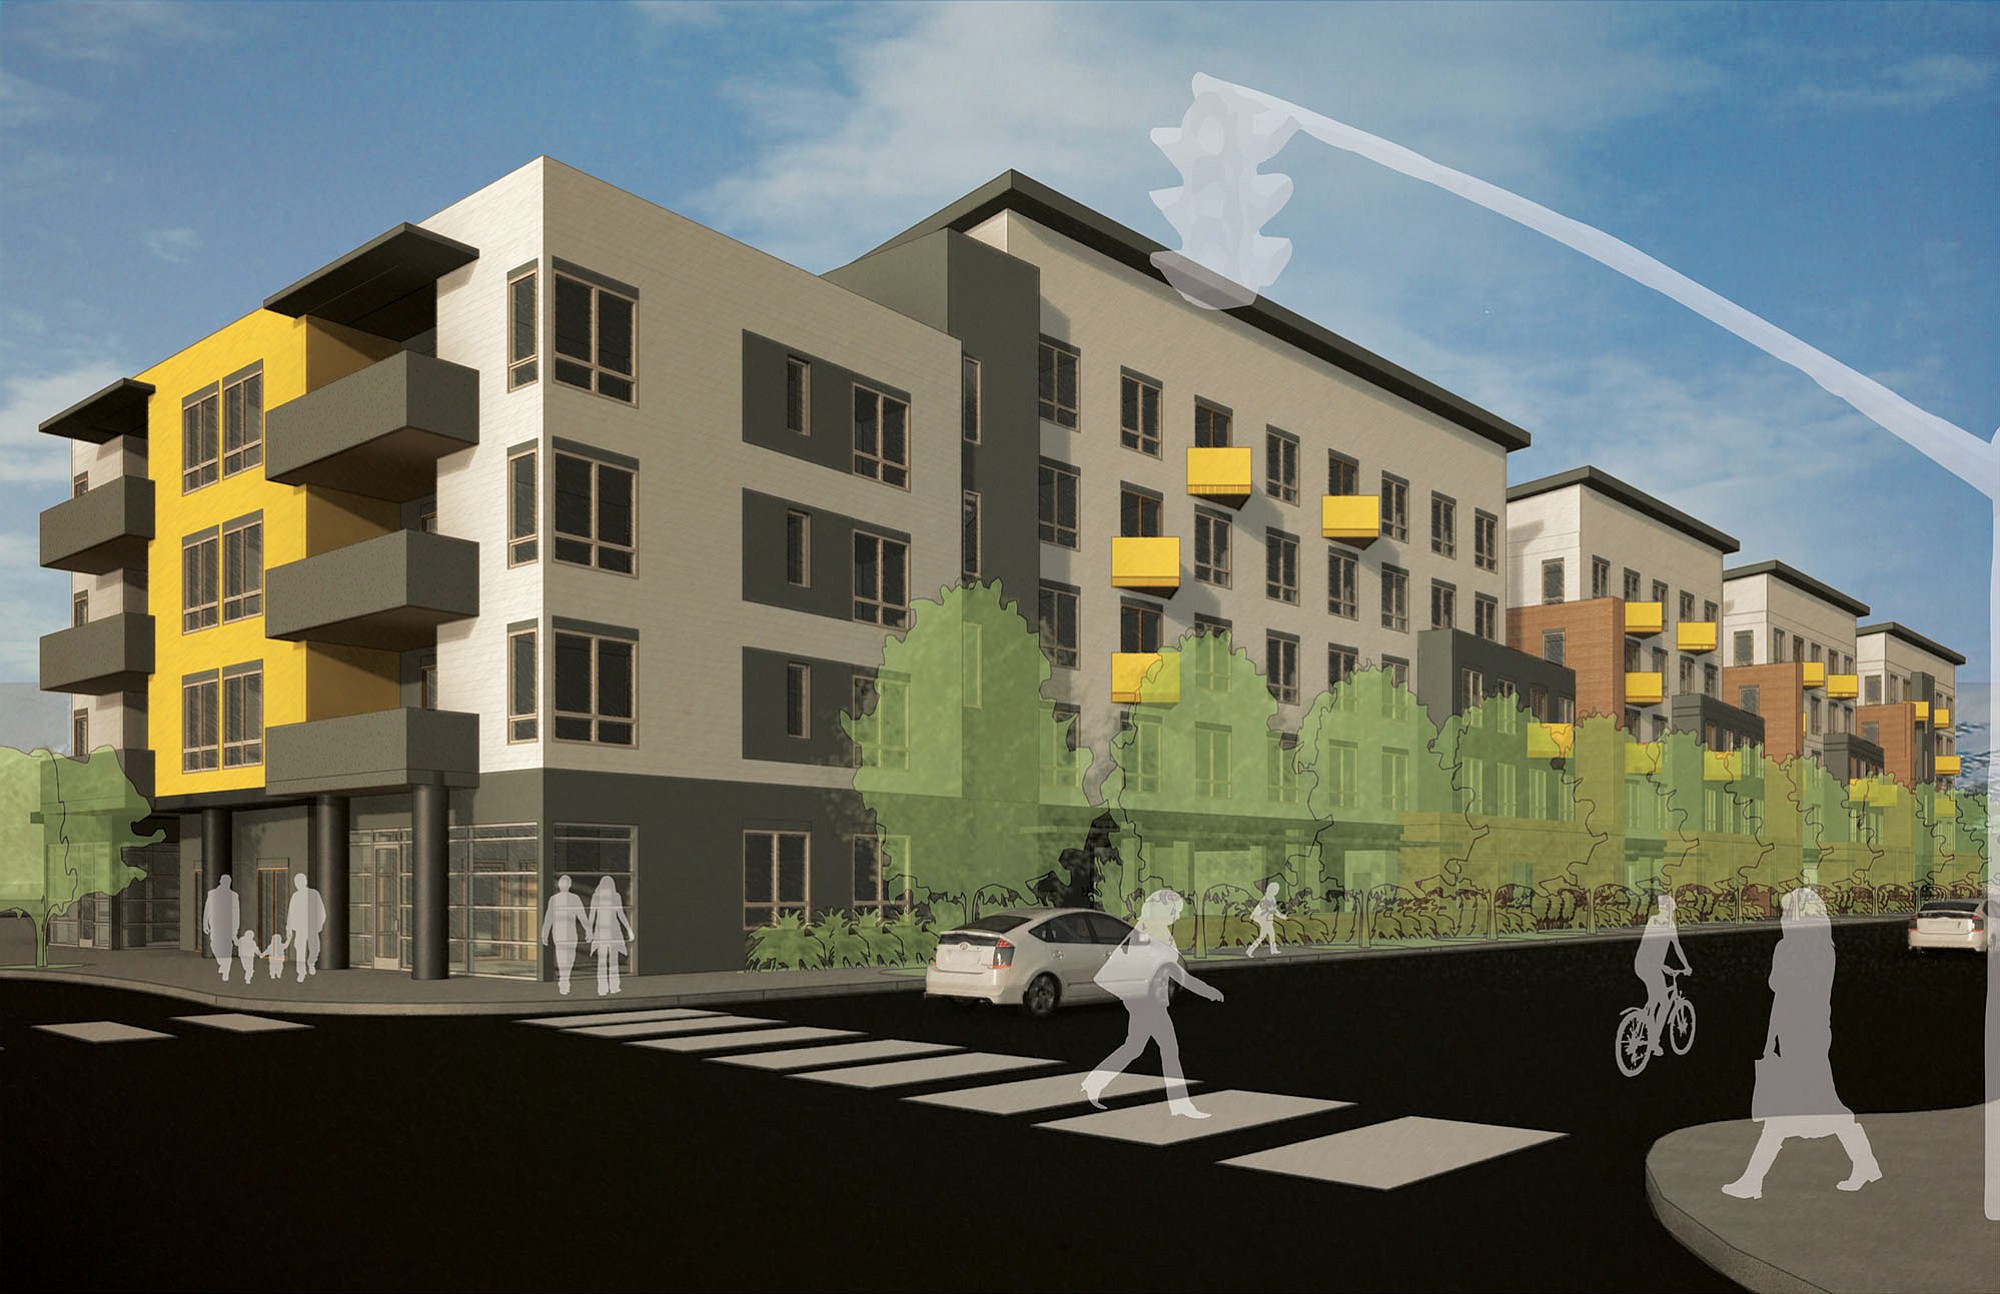 A designers' vision of 15 West Apartments, which will include 120 apartments that are targeted at people who earn up to 60 percent of the area median.